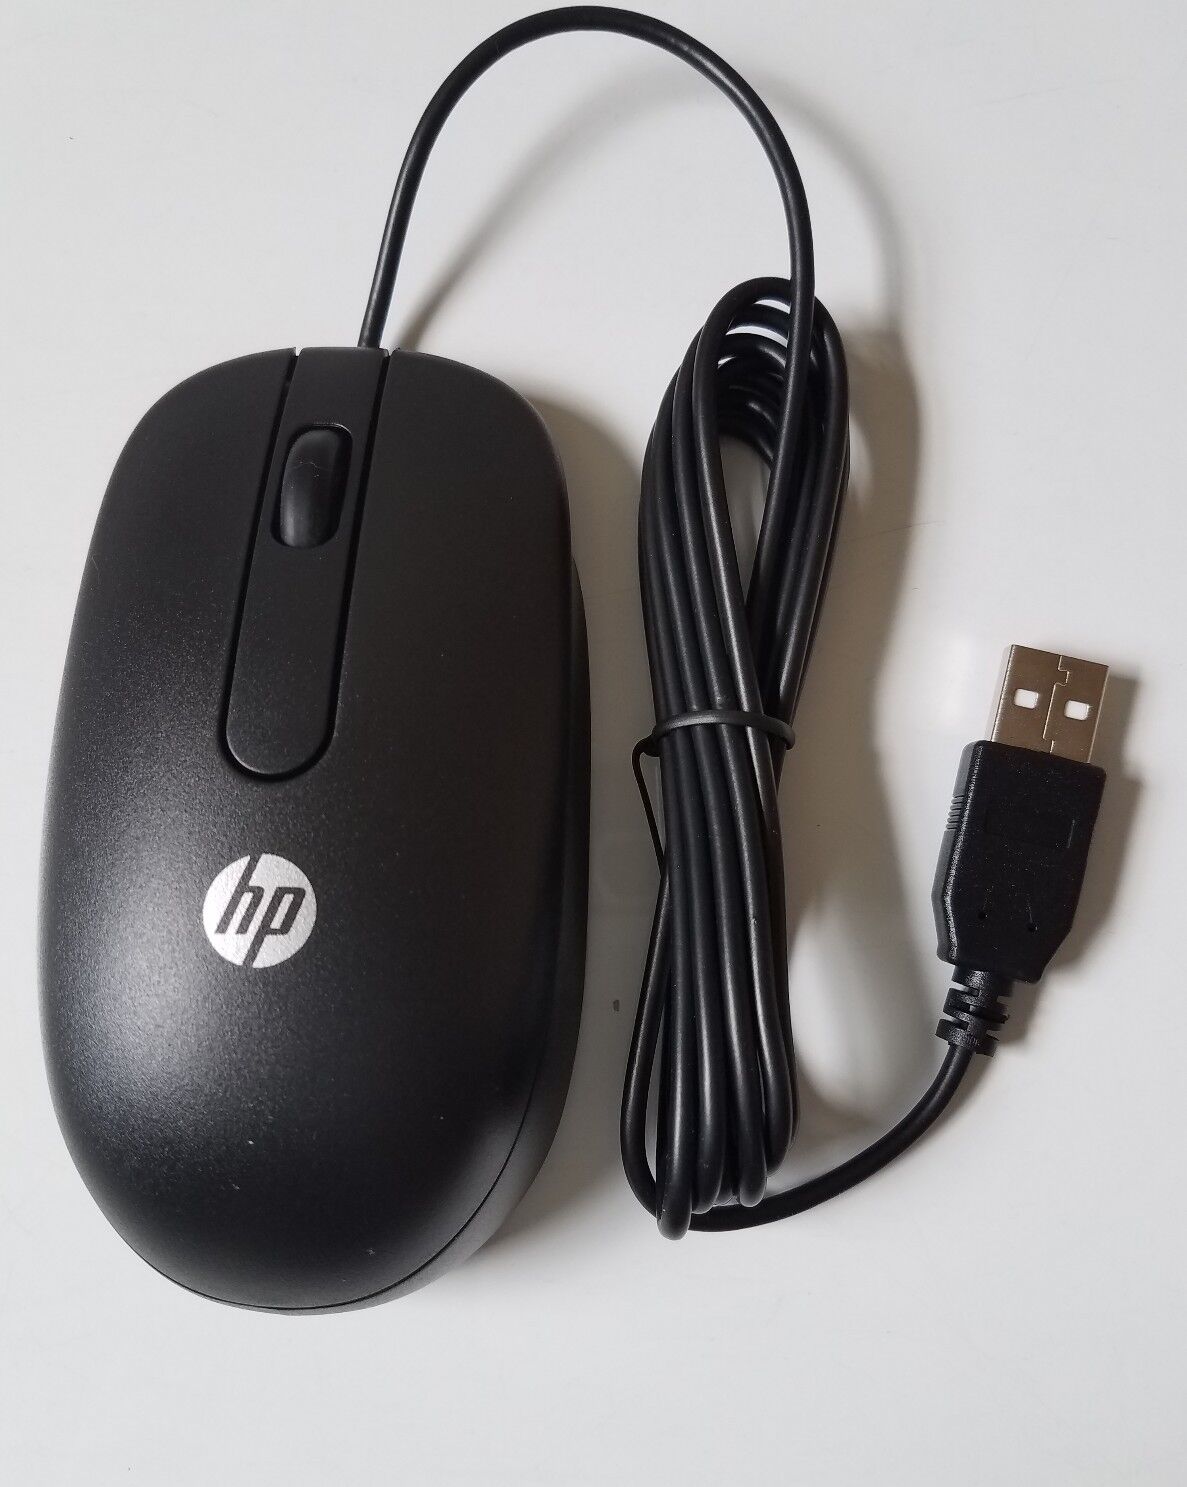 HP P/N 672652-001 Black Wired Optical Mouse - USB 2-Button Scroll